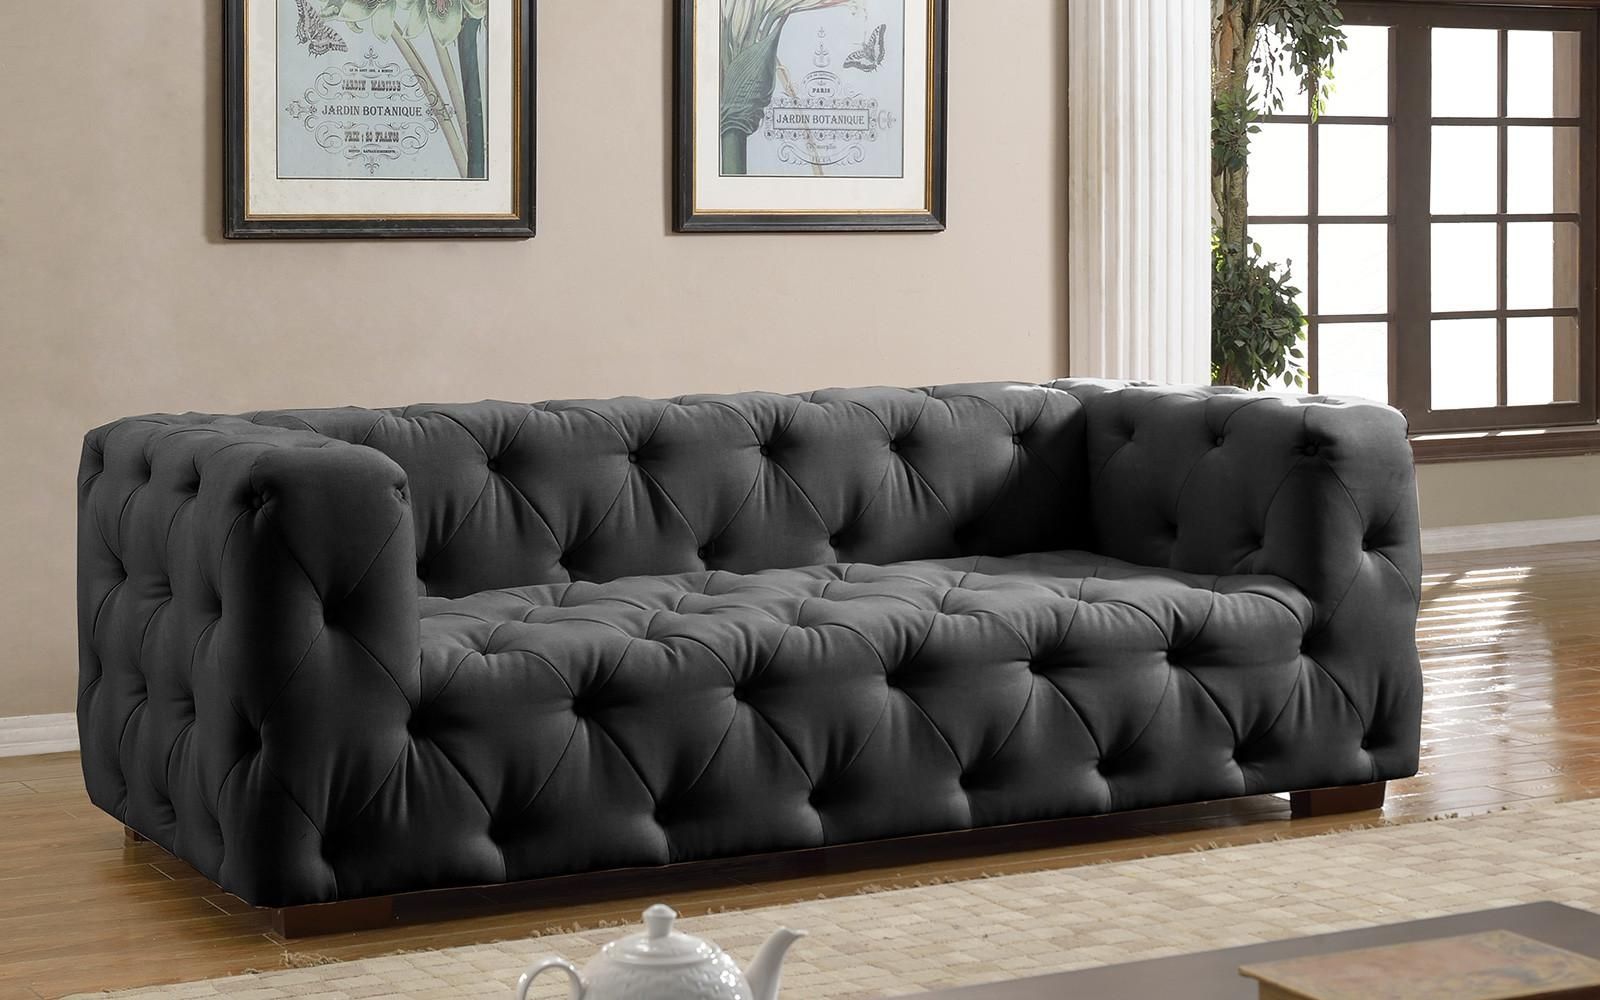 Luxurious Modern Large Tufted Linen Fabric Sofa – Walmart With Tufted Linen Sofas (View 5 of 20)